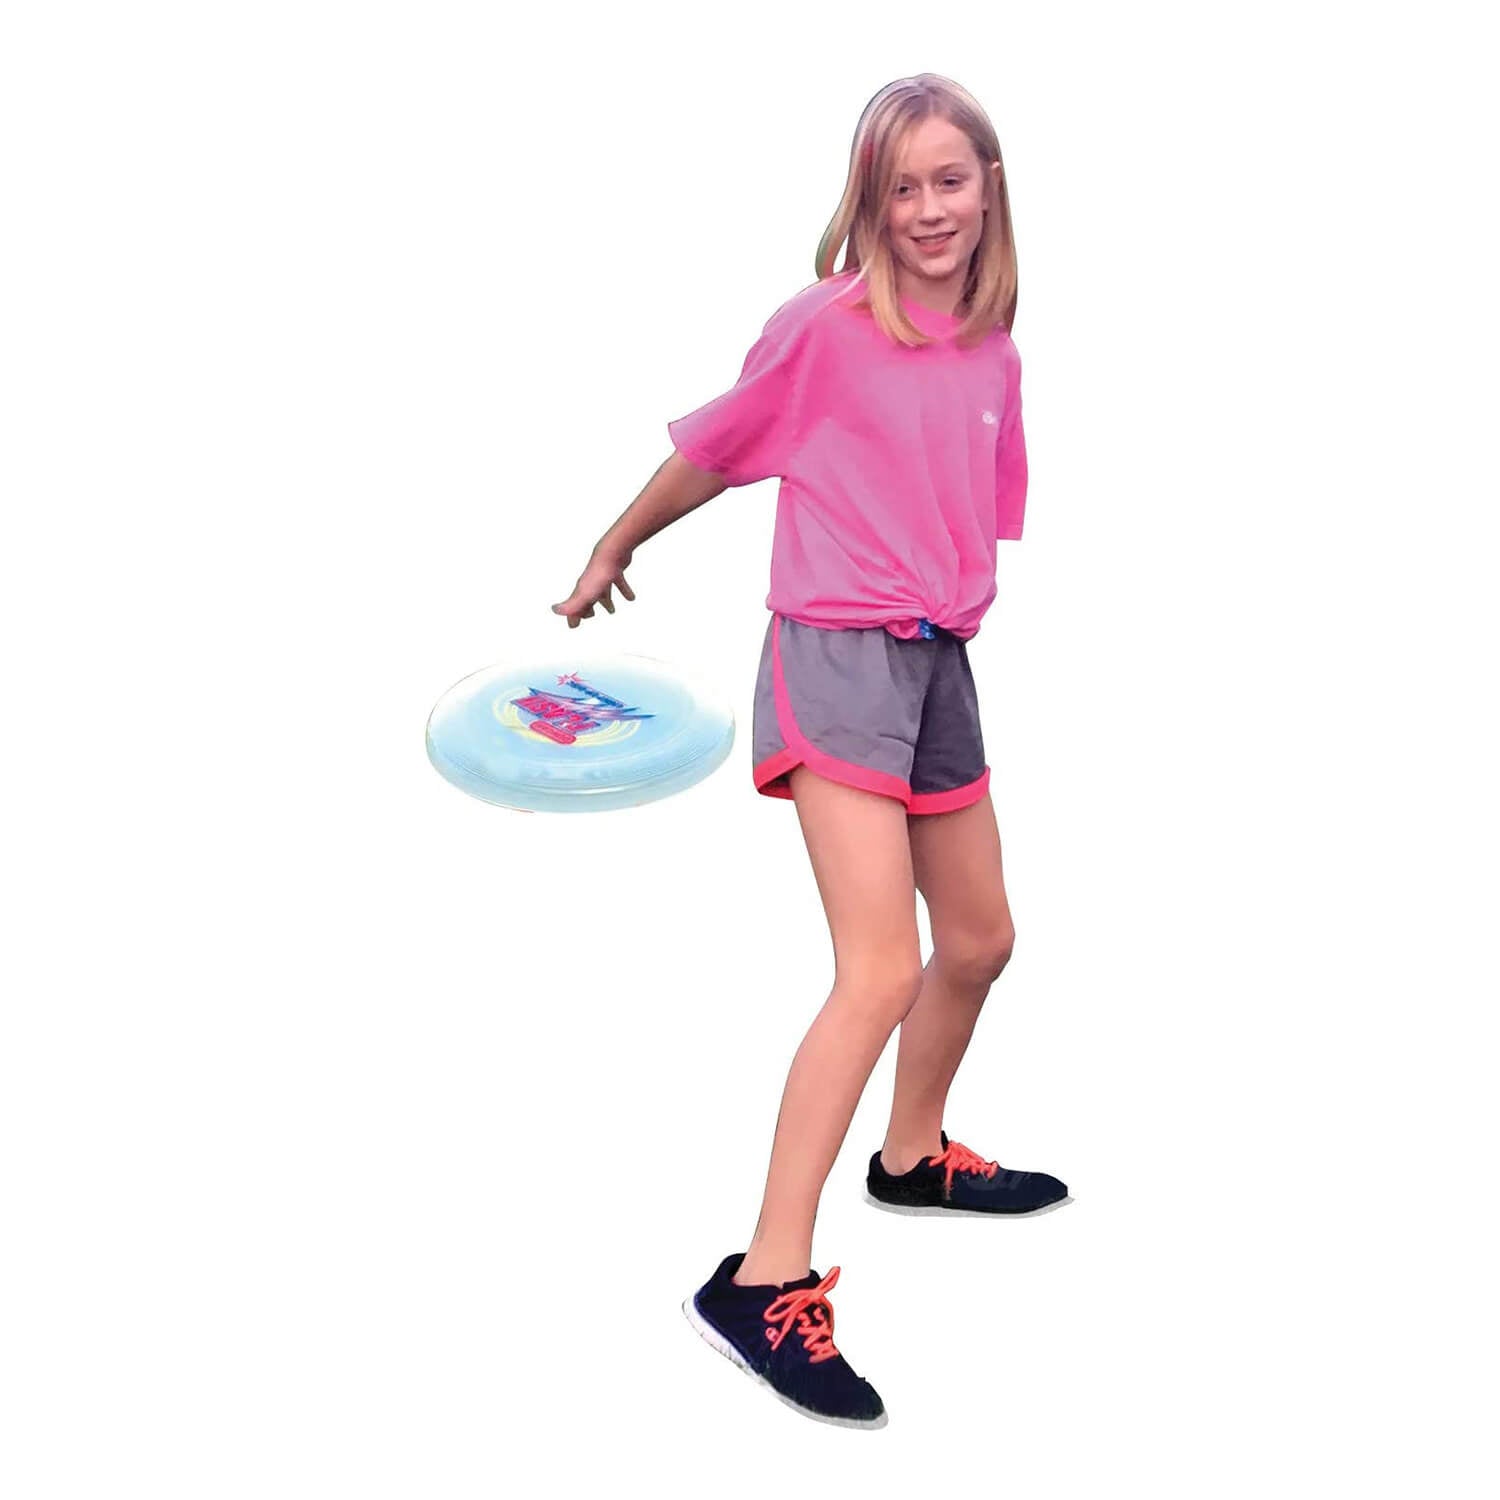 Girl playing with the frisbee